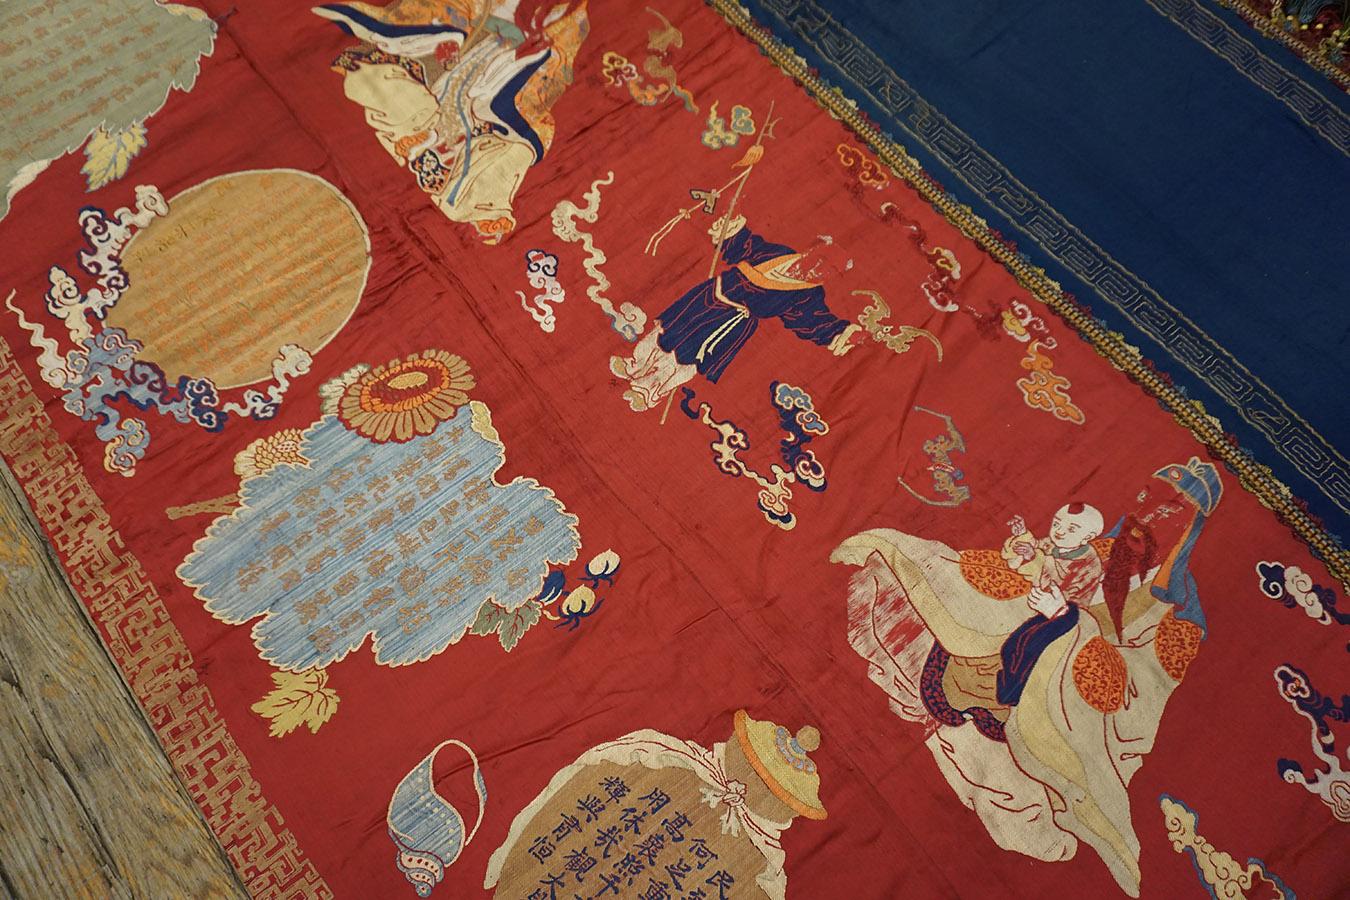 19th Century Chinese Pictorial Embroidery Textile (3' 6'' x 11' 4'' - 107 x 345) For Sale 4